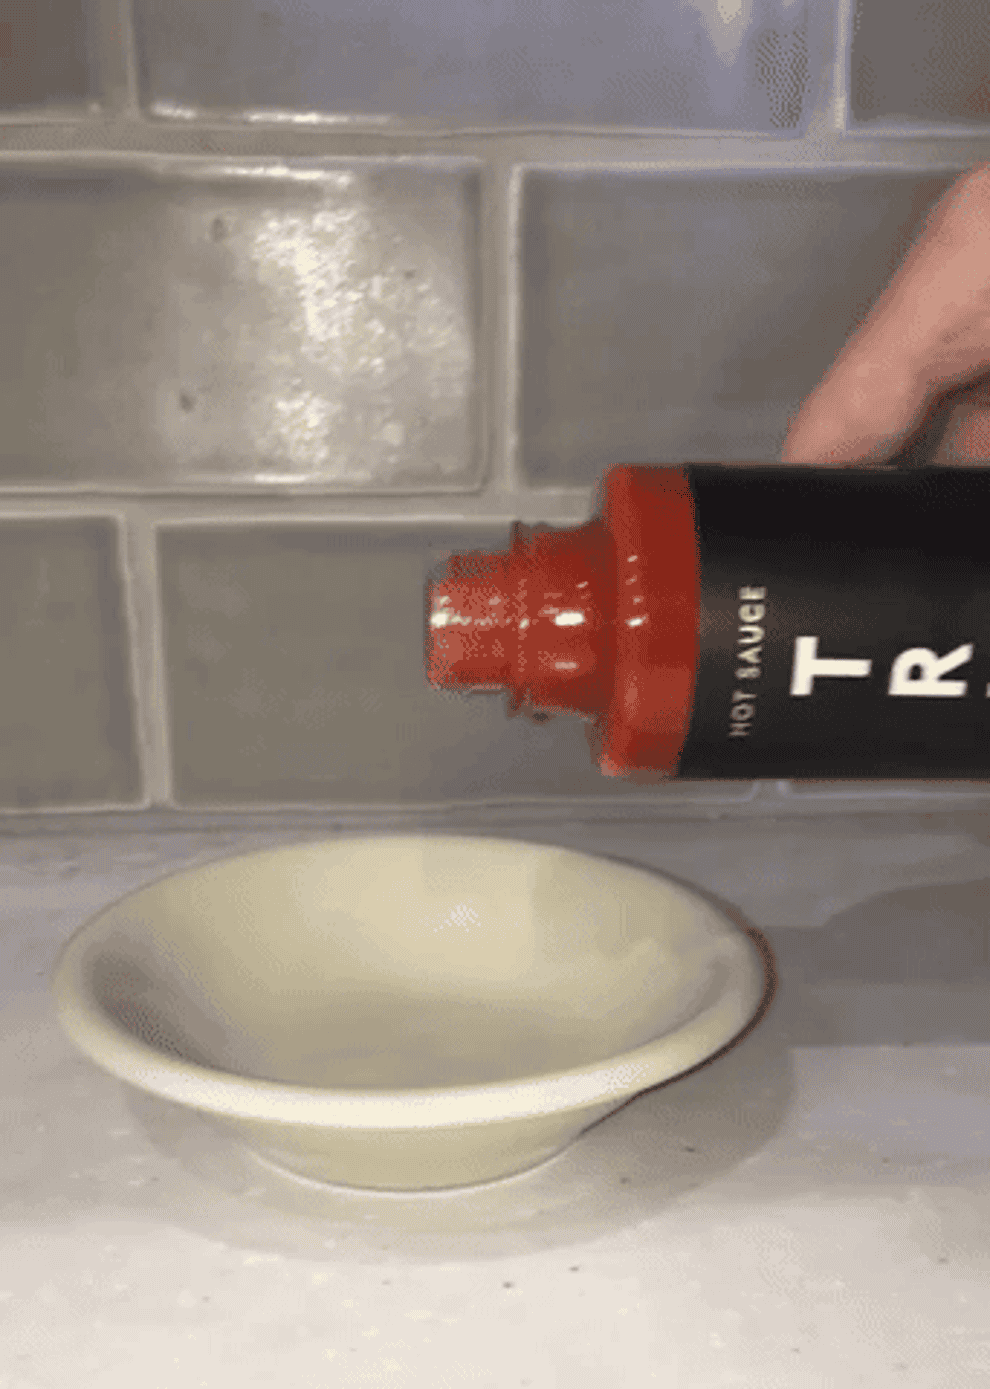 Gif of the writer pouring some of the Original Truff sauce into a dish to show its consistency and color